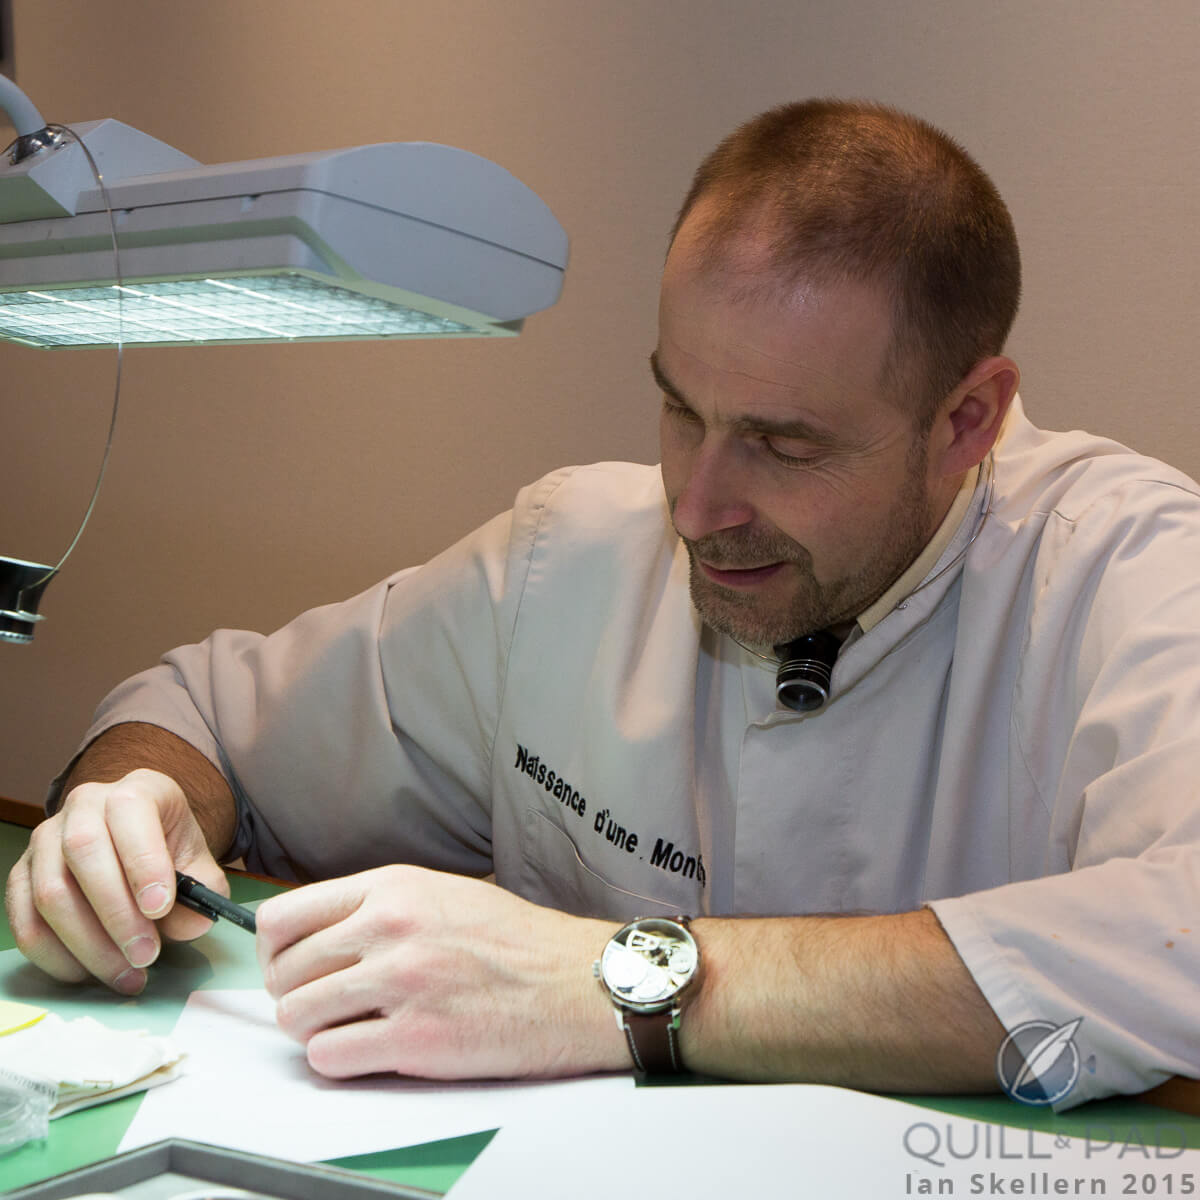 Michel Boulanger, master watchmaker and normally a teacher of watchmaking, has become a student again for the Le Garde Temps, Naissance d’une Montre project